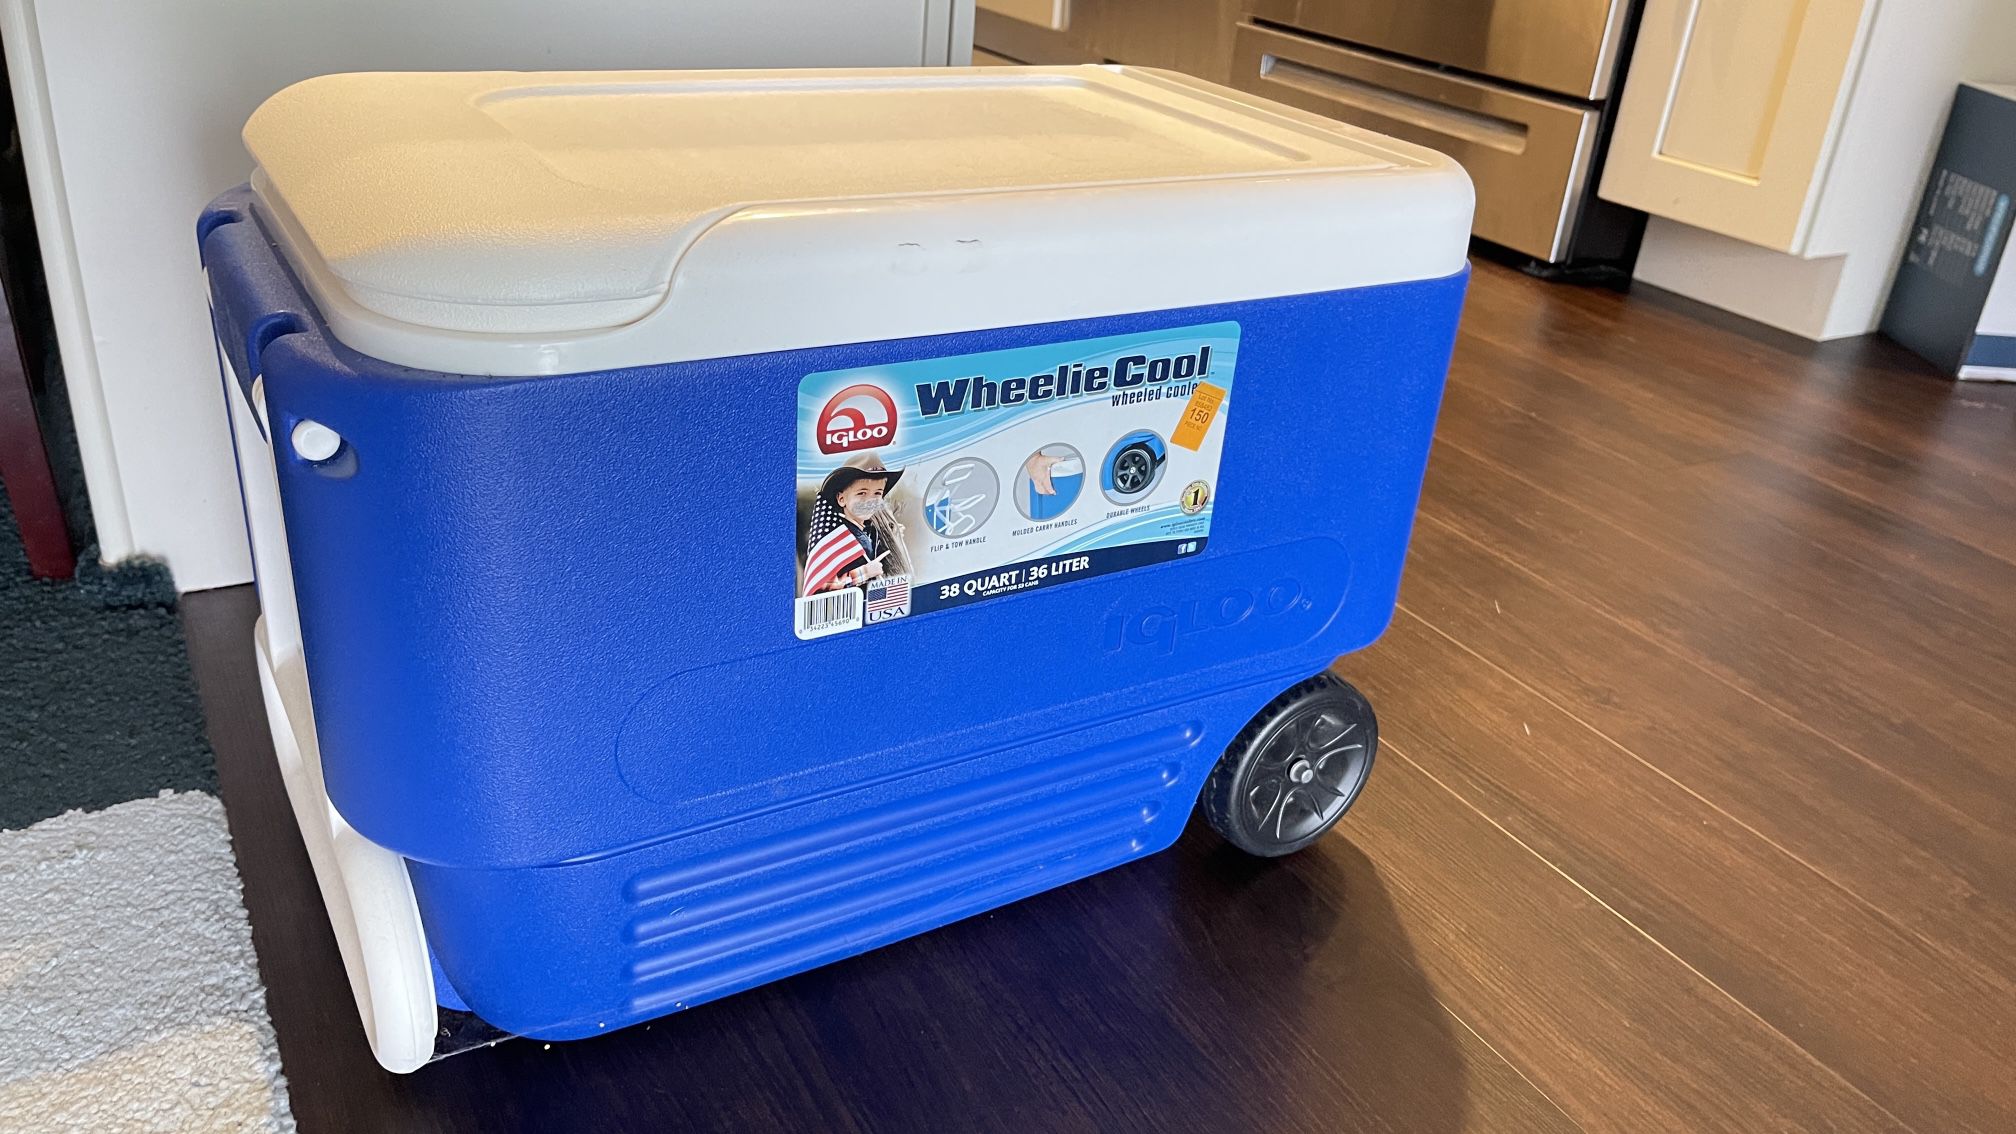 Cooler with wheels - 38 quarts